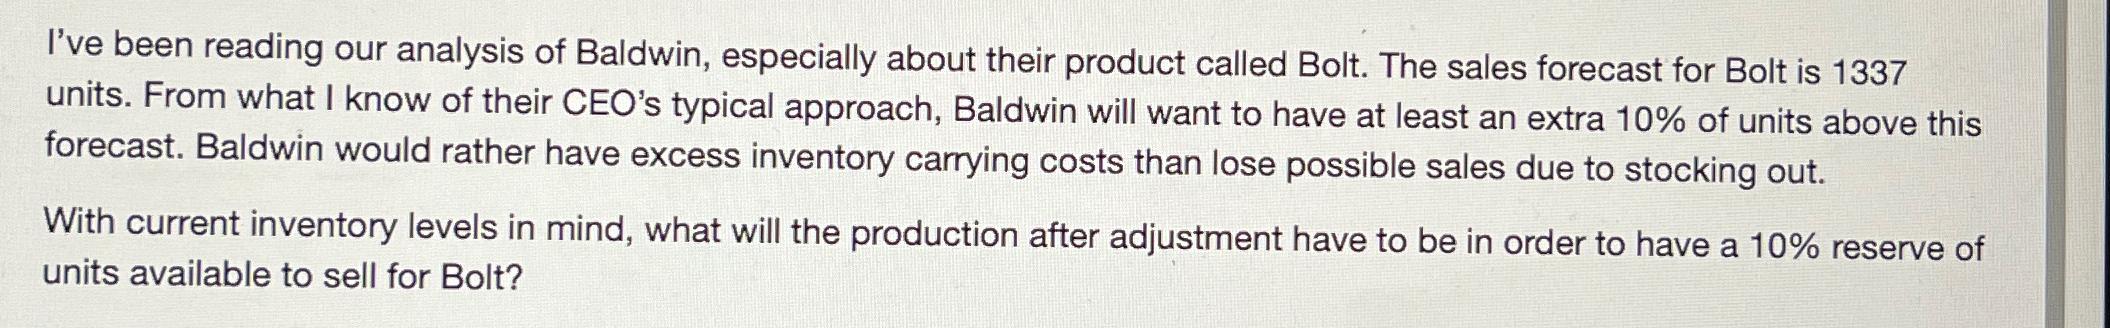 I've been reading our analysis of Baldwin, especially about their product called Bolt. The sales forecast for